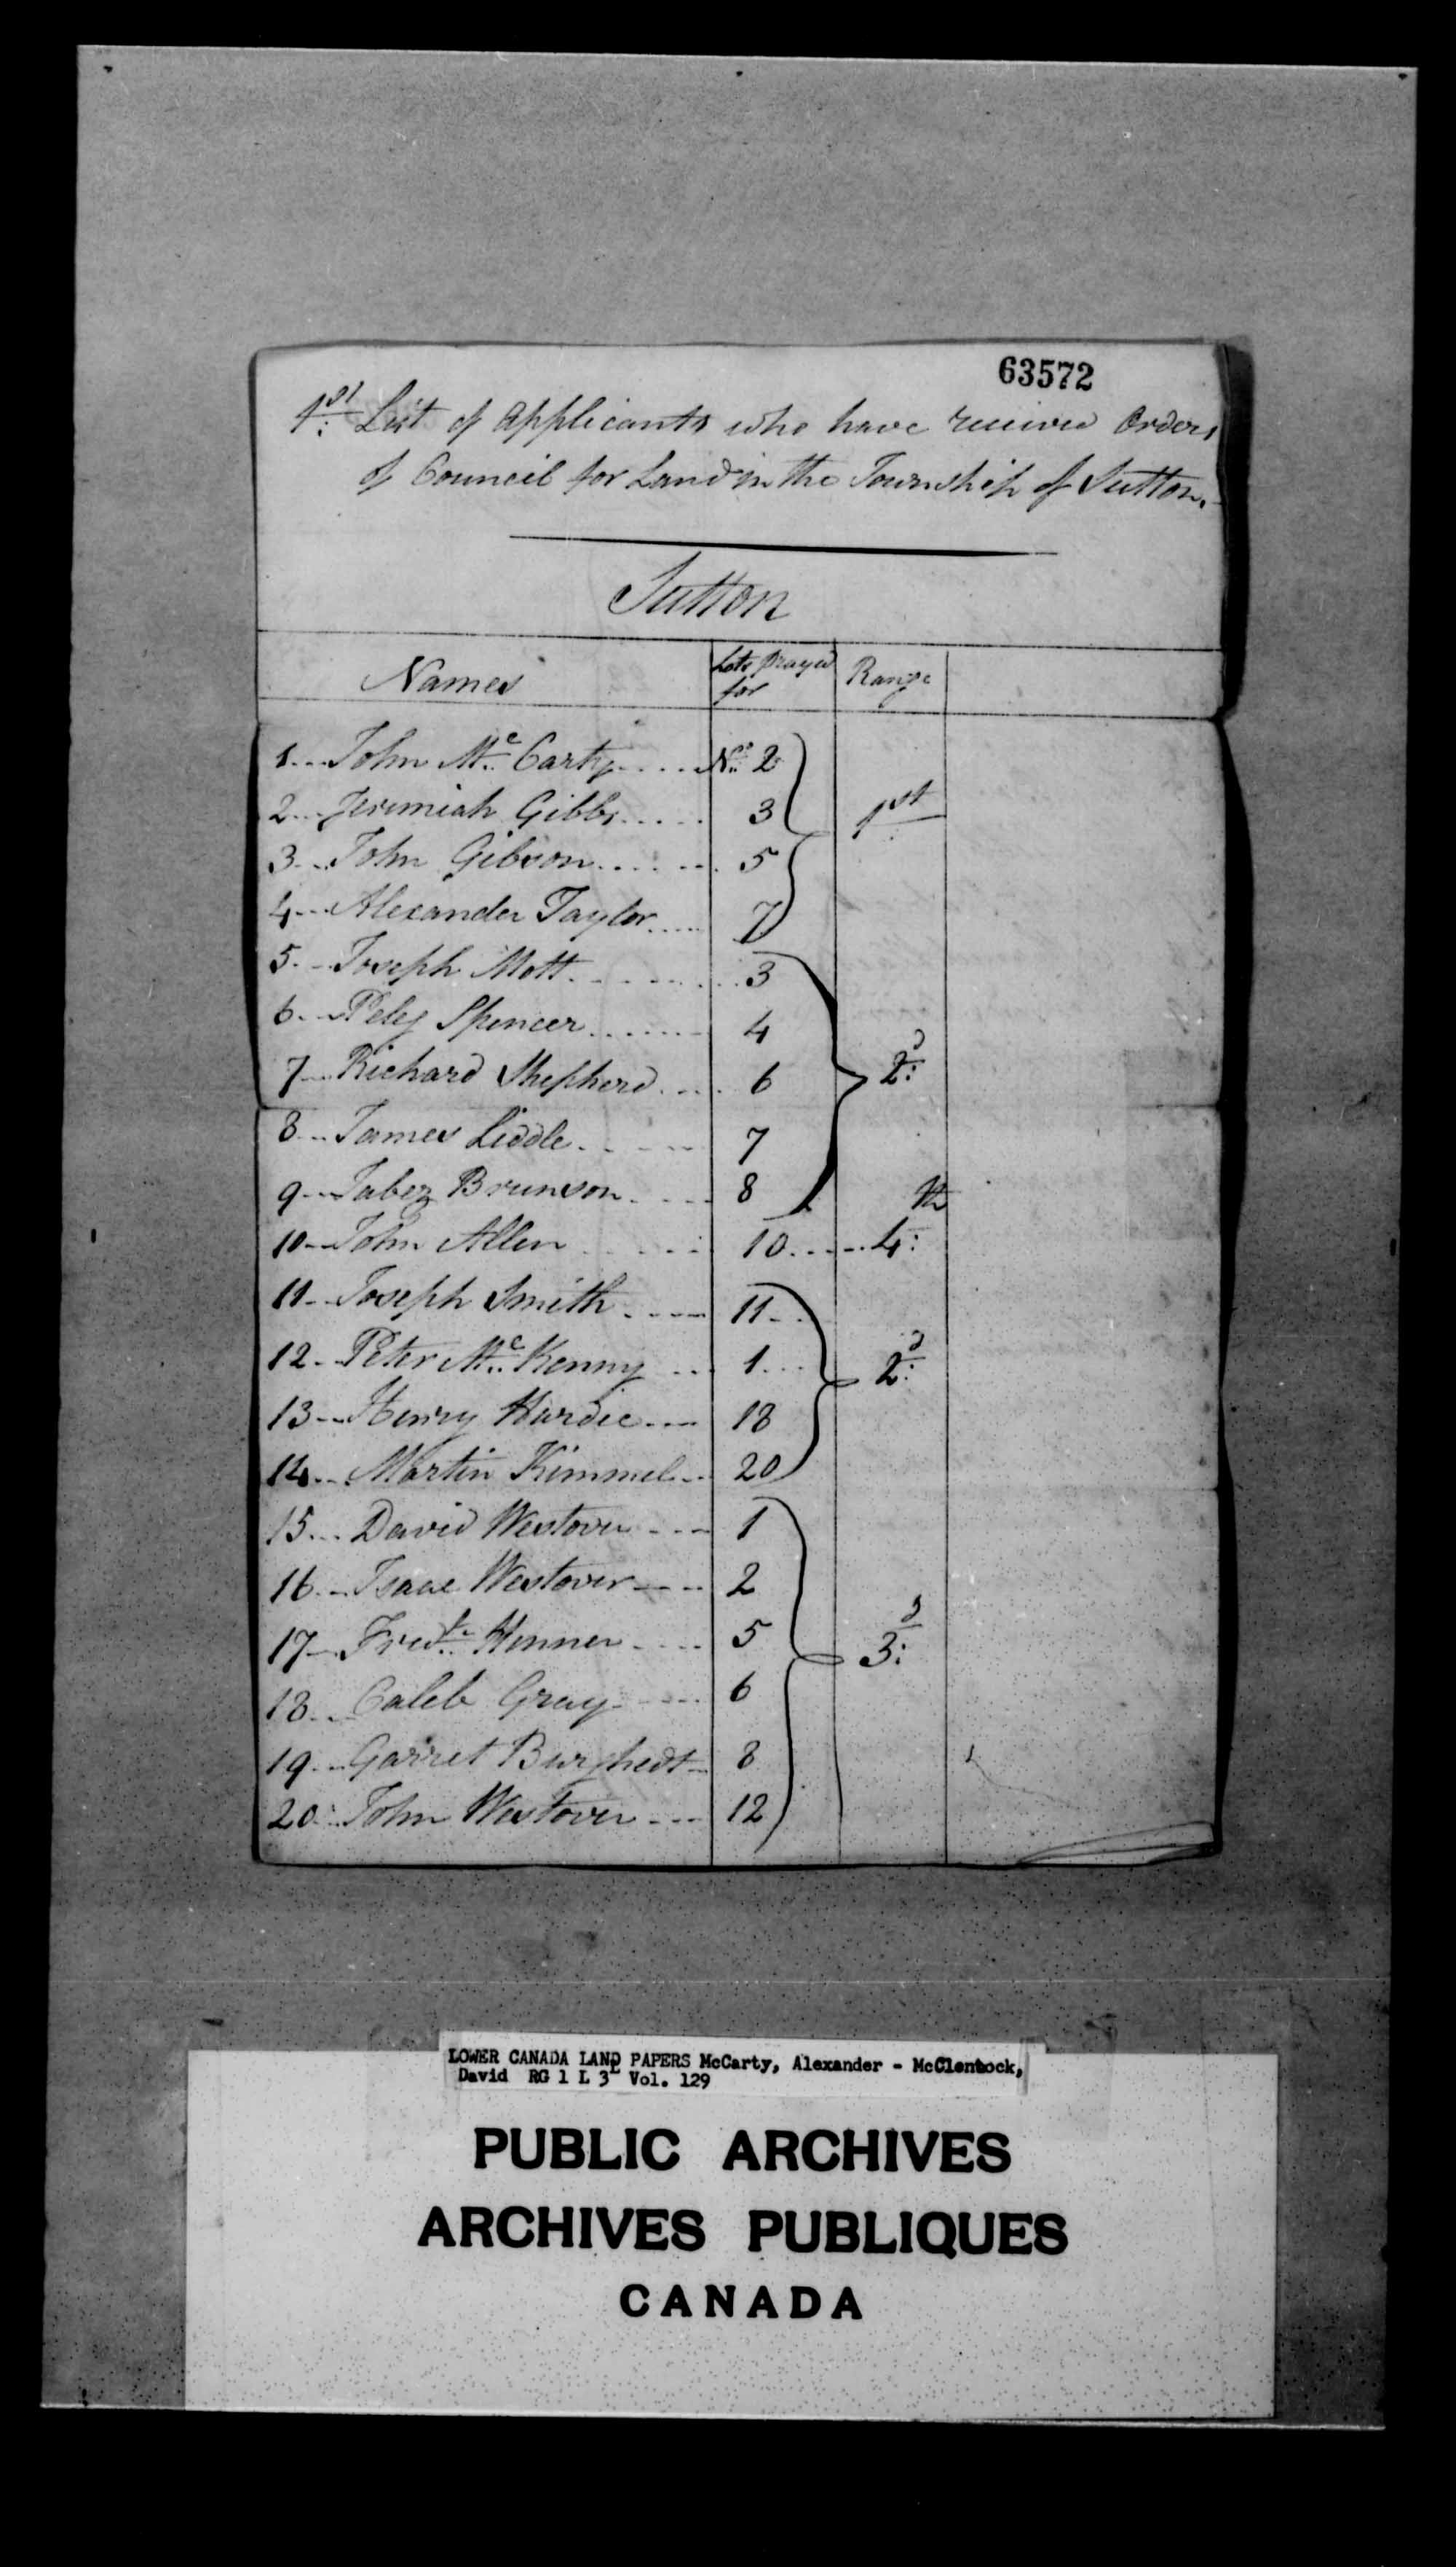 Digitized page of  for Image No.: e008708621